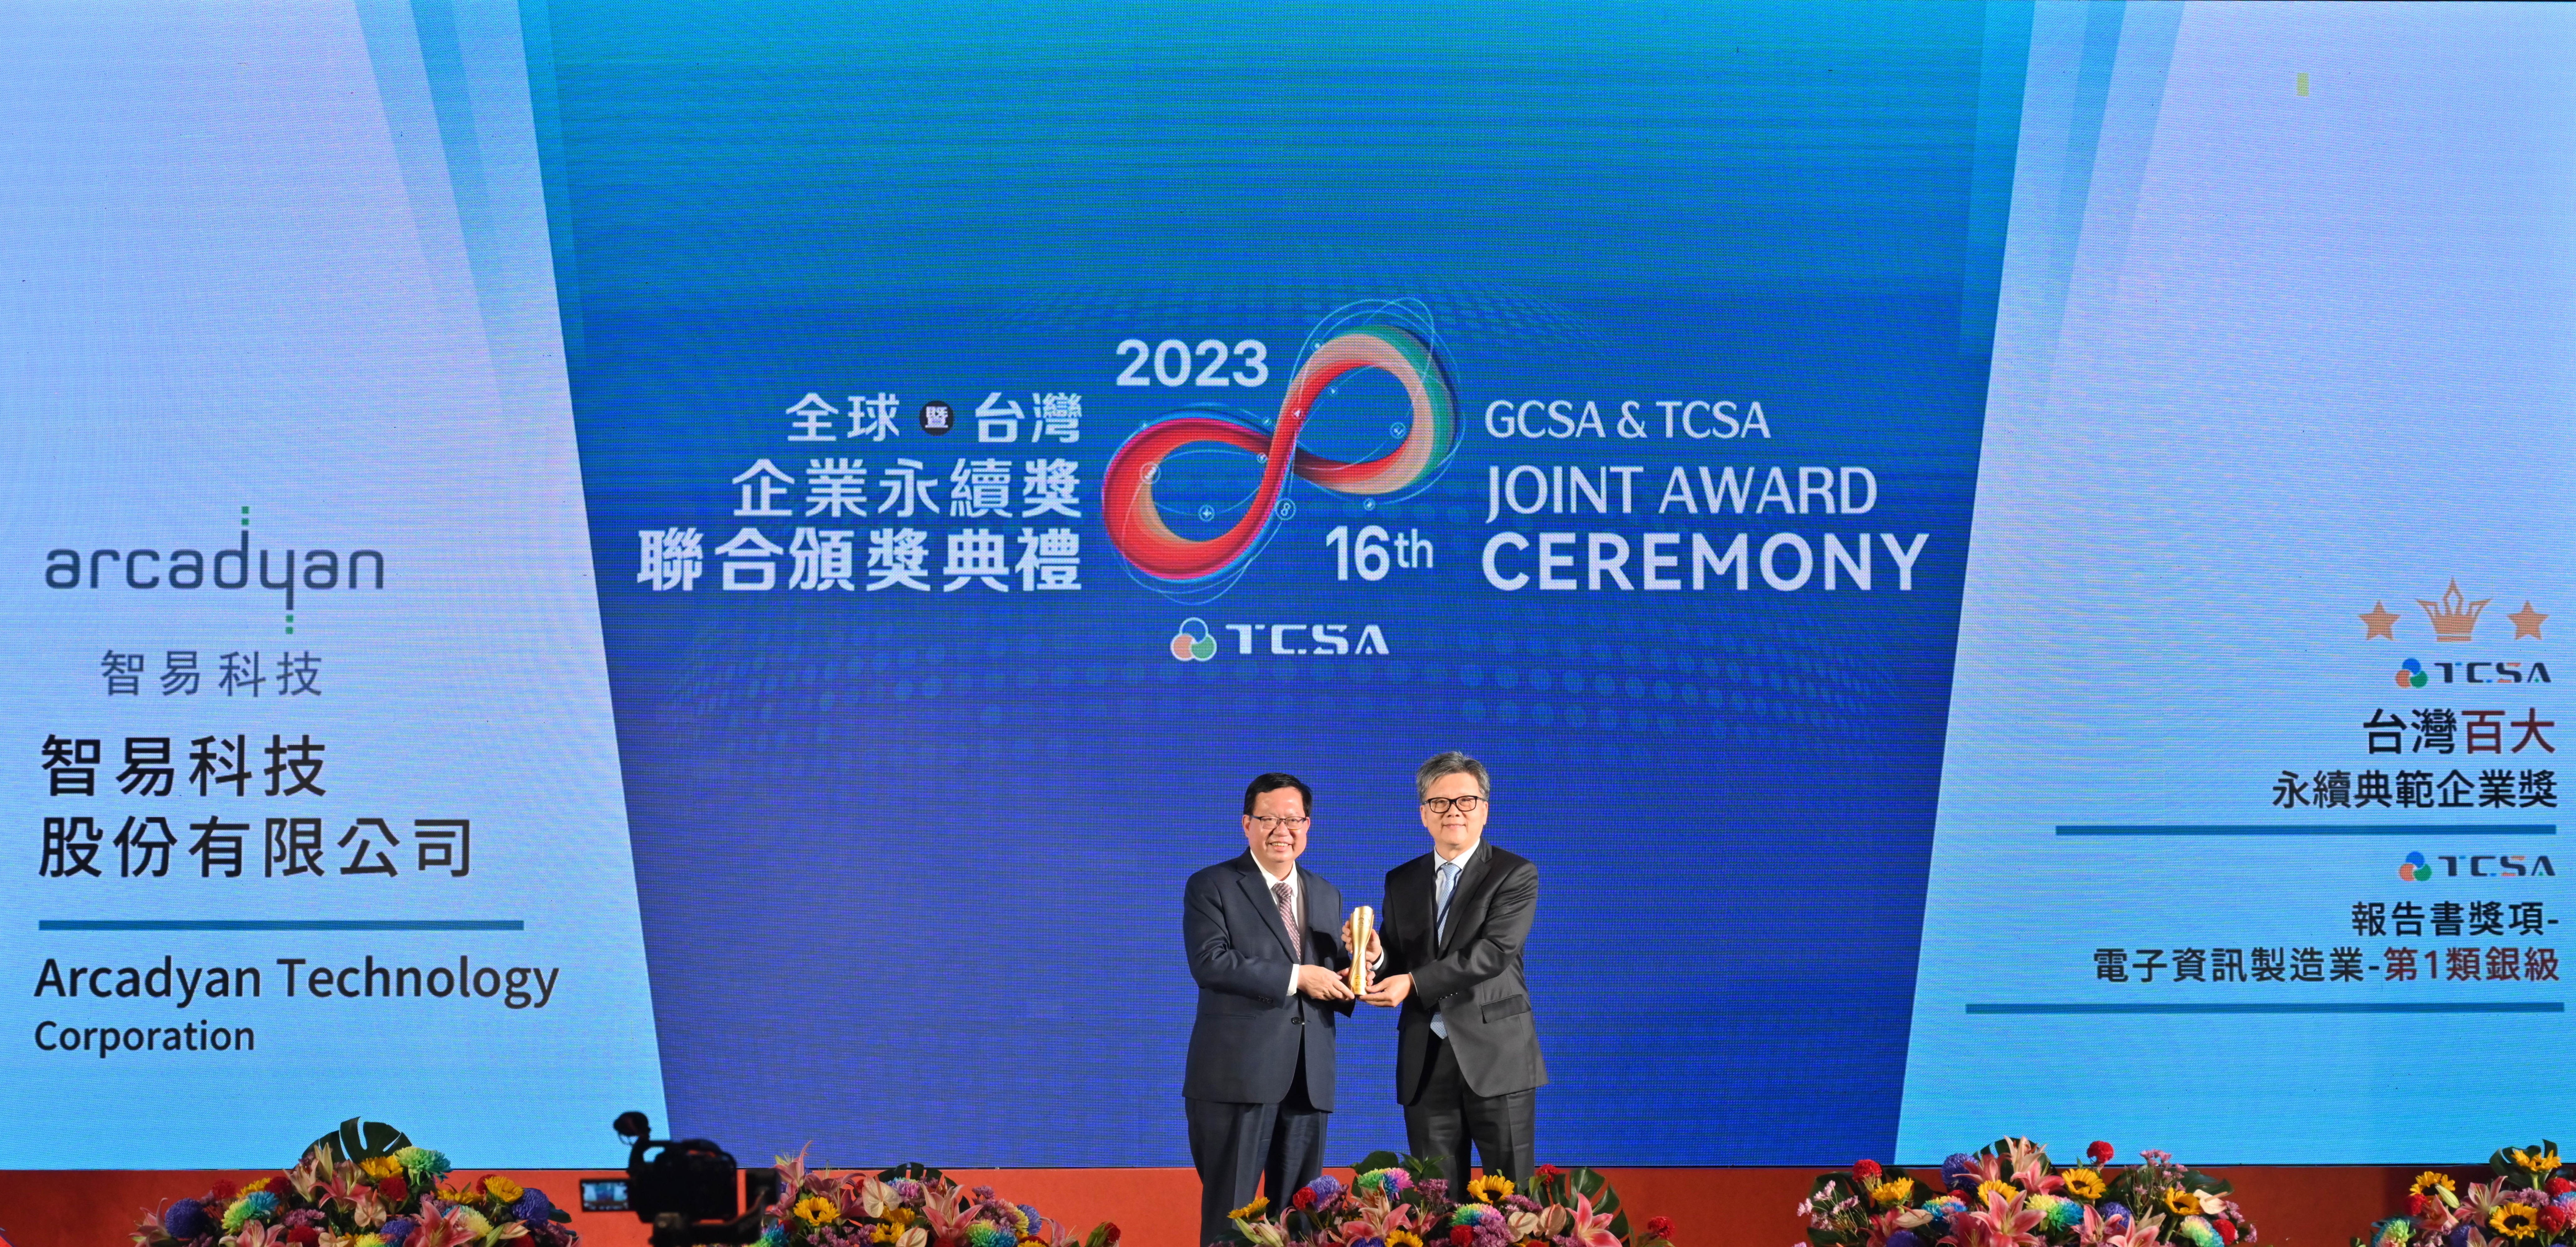 Focused on Sustainability, Arcadyan is Awarded the Top 100 Taiwanese Sustainable Corporates Award in 2023